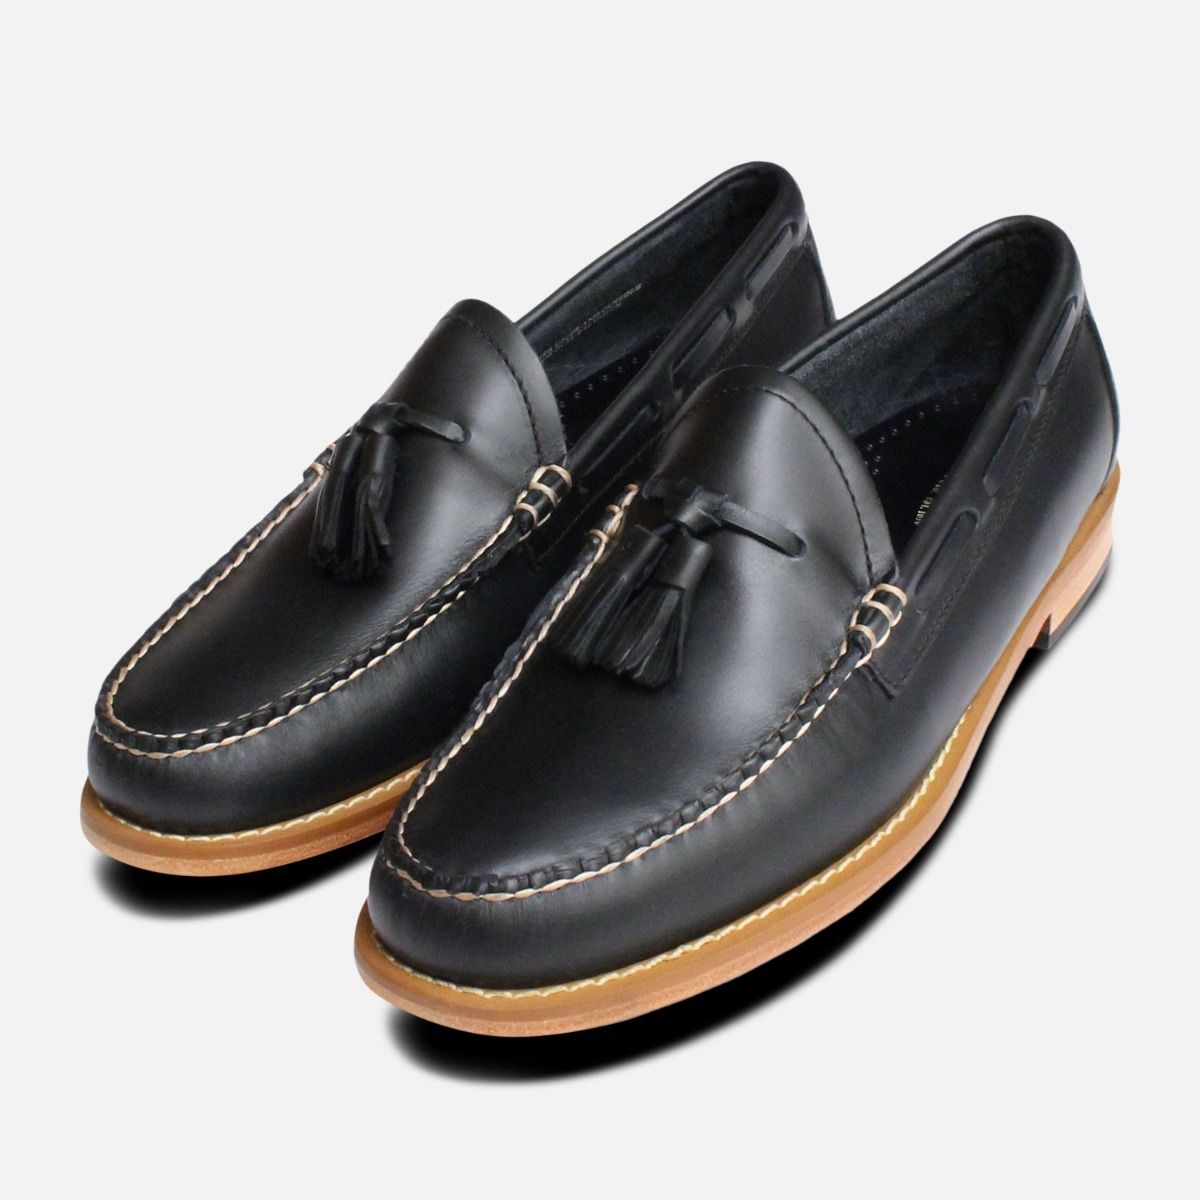 mens navy loafers with tassels